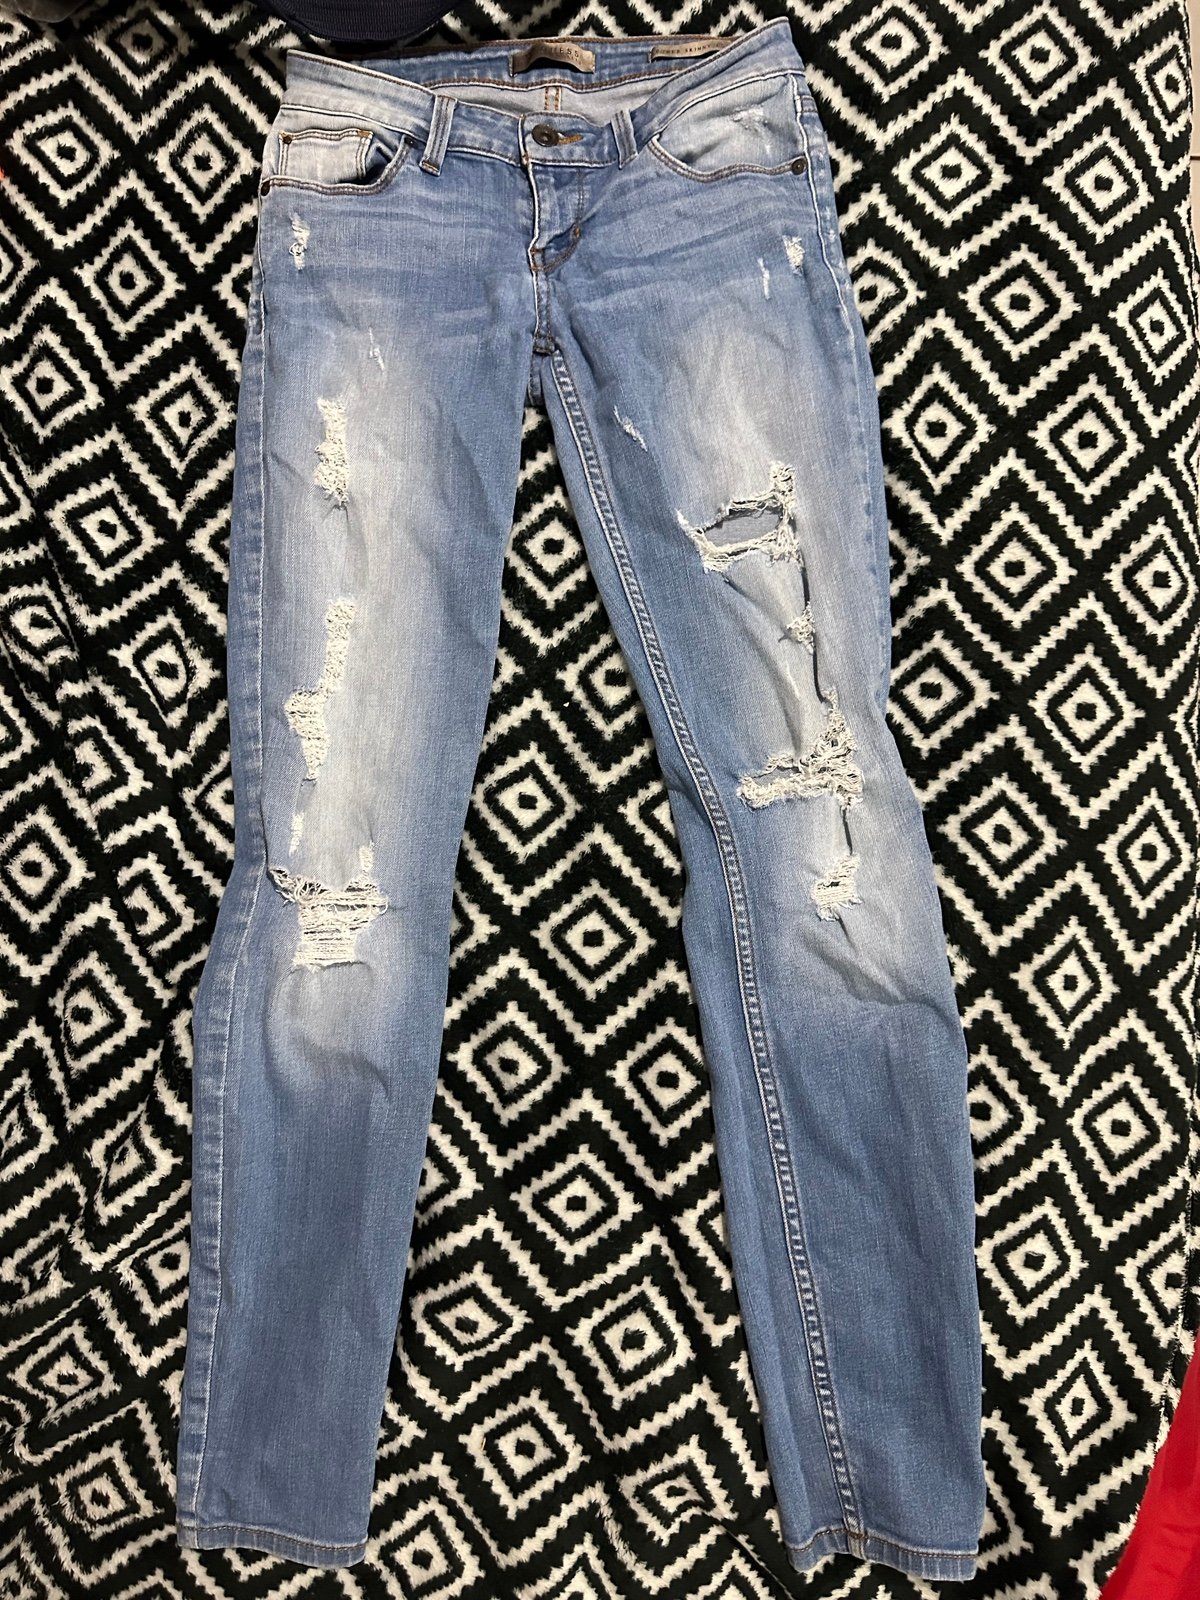 Great Guess skinny jeans jEfOjJVKE Everyday Low Prices